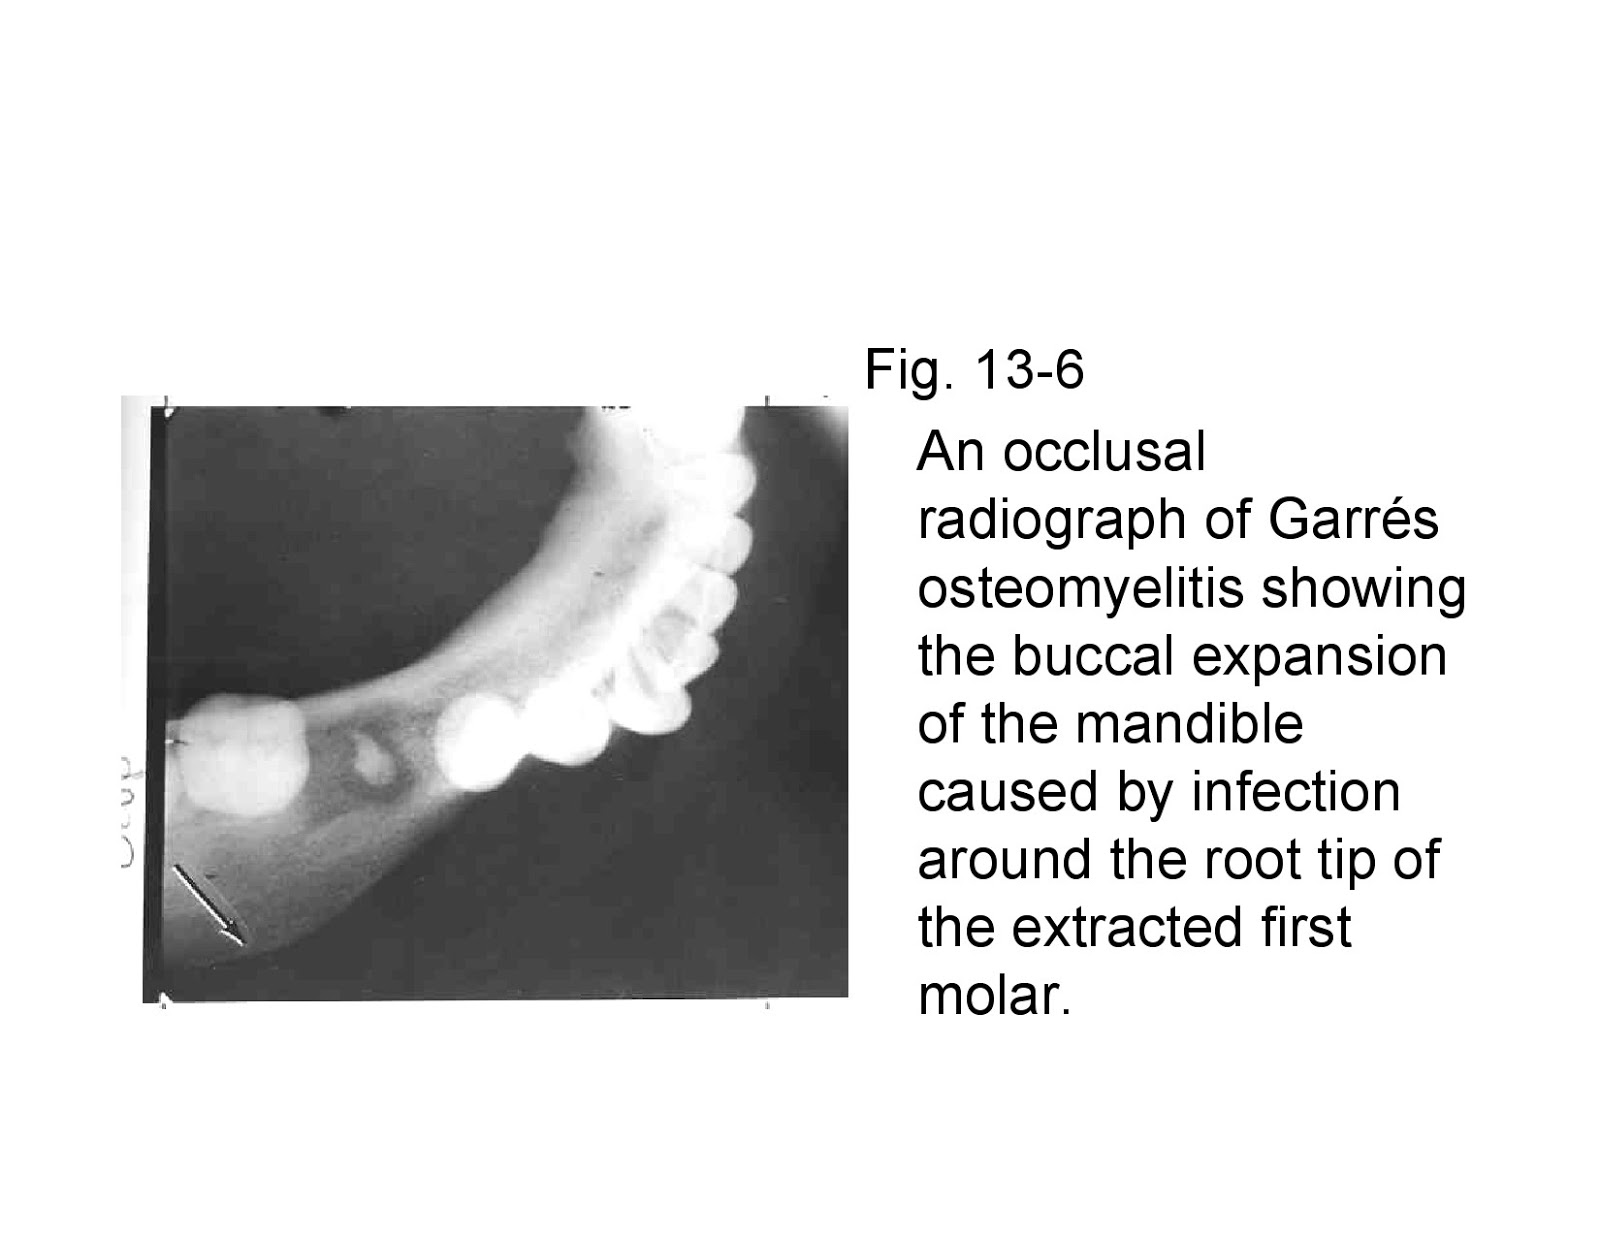 Dentistry and Medicine: Osteomyelitis-with Radiological features